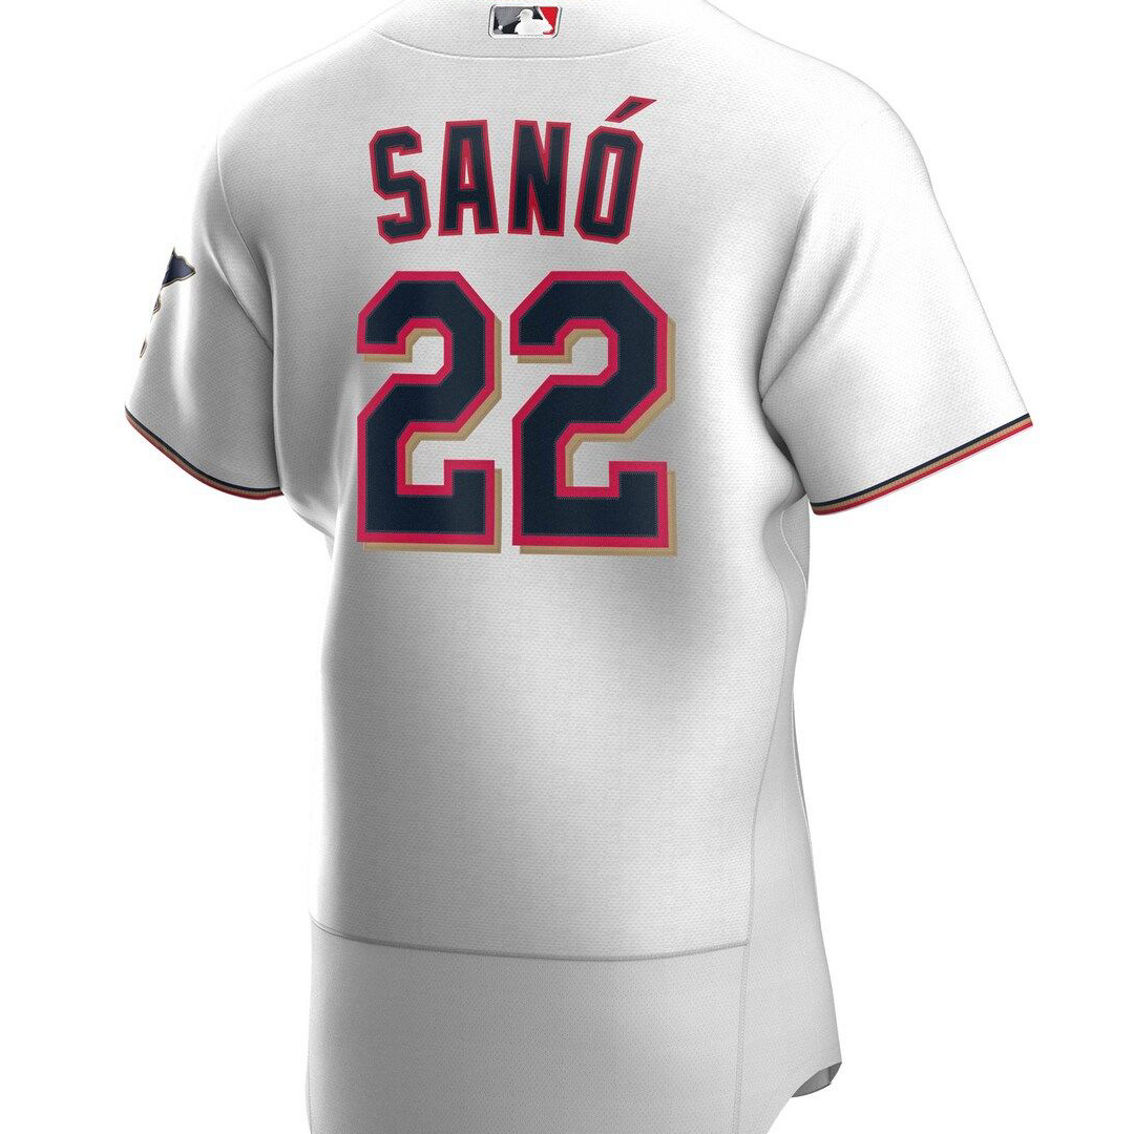 Nike Men's Miguel Sano White Minnesota Twins Home Authentic Player Jersey - Image 4 of 4